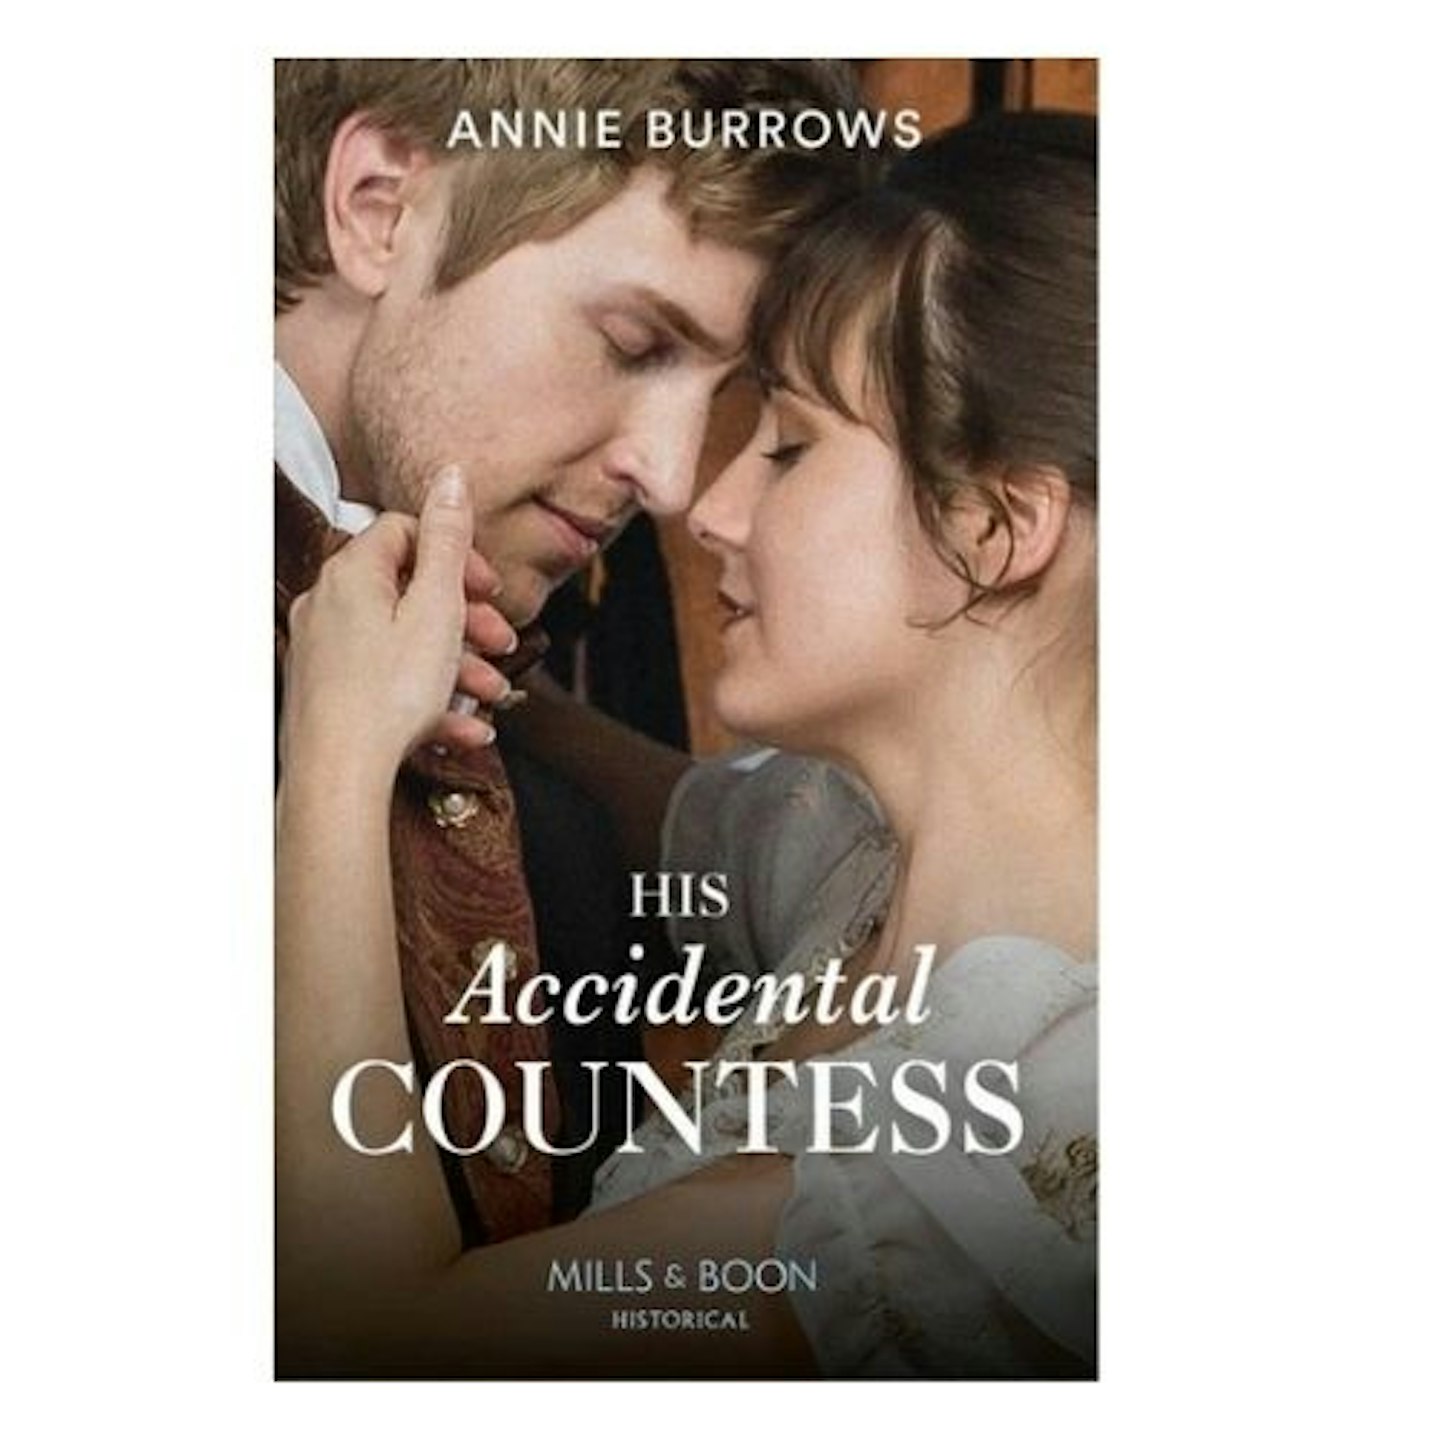 His accidental Countess